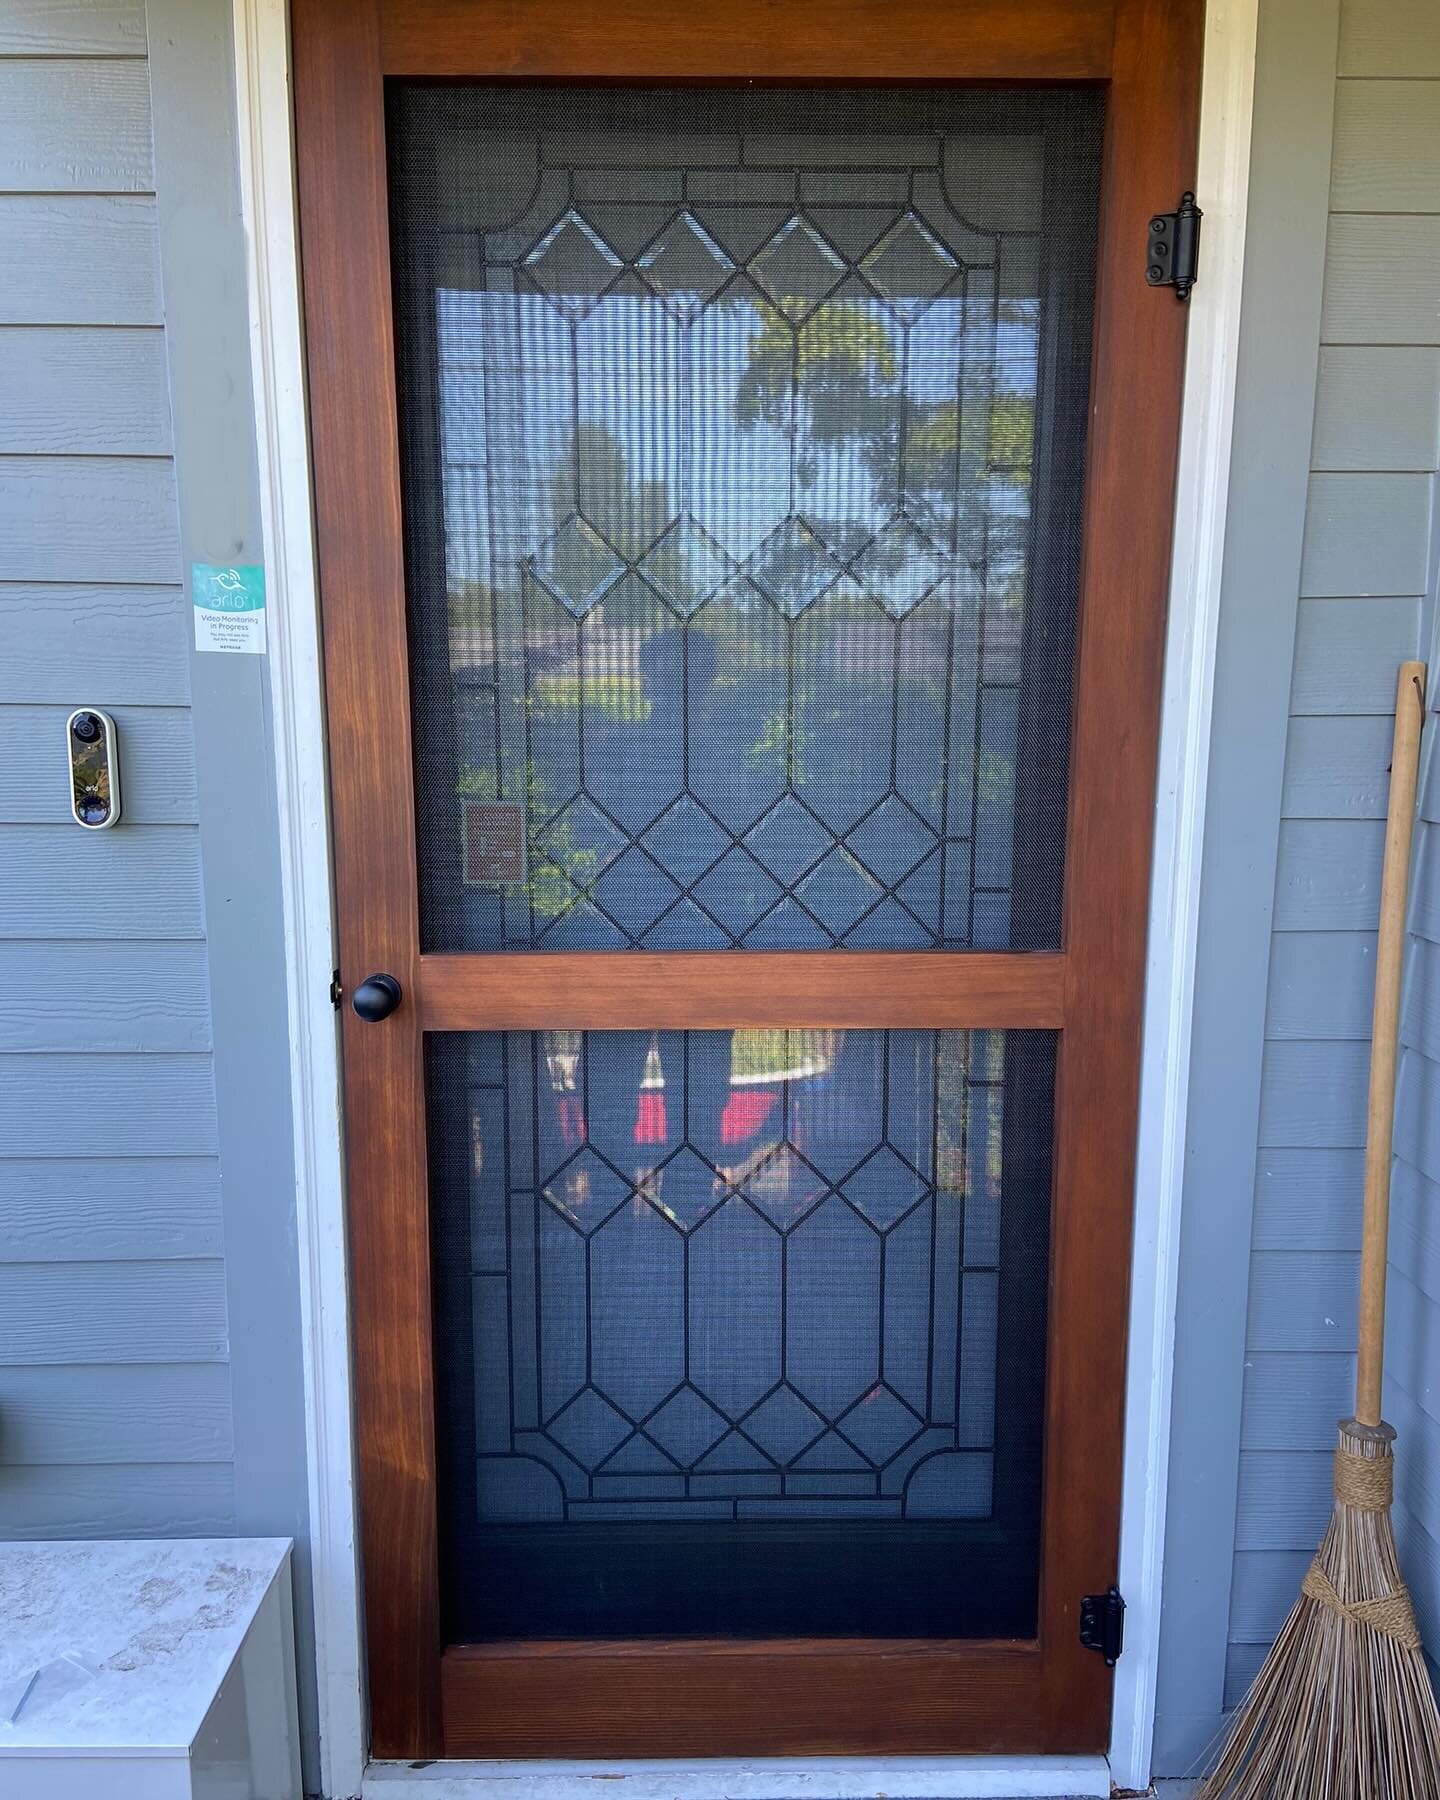 A Mable style, custom-crafted screen door for this '40s charmer in Greenwood! 🚪🍂 Butternut-colored elegance with delicate detailing around the doorknob. The simple, modern design invites the outdoor breeze and offers a view of the garden oasis from